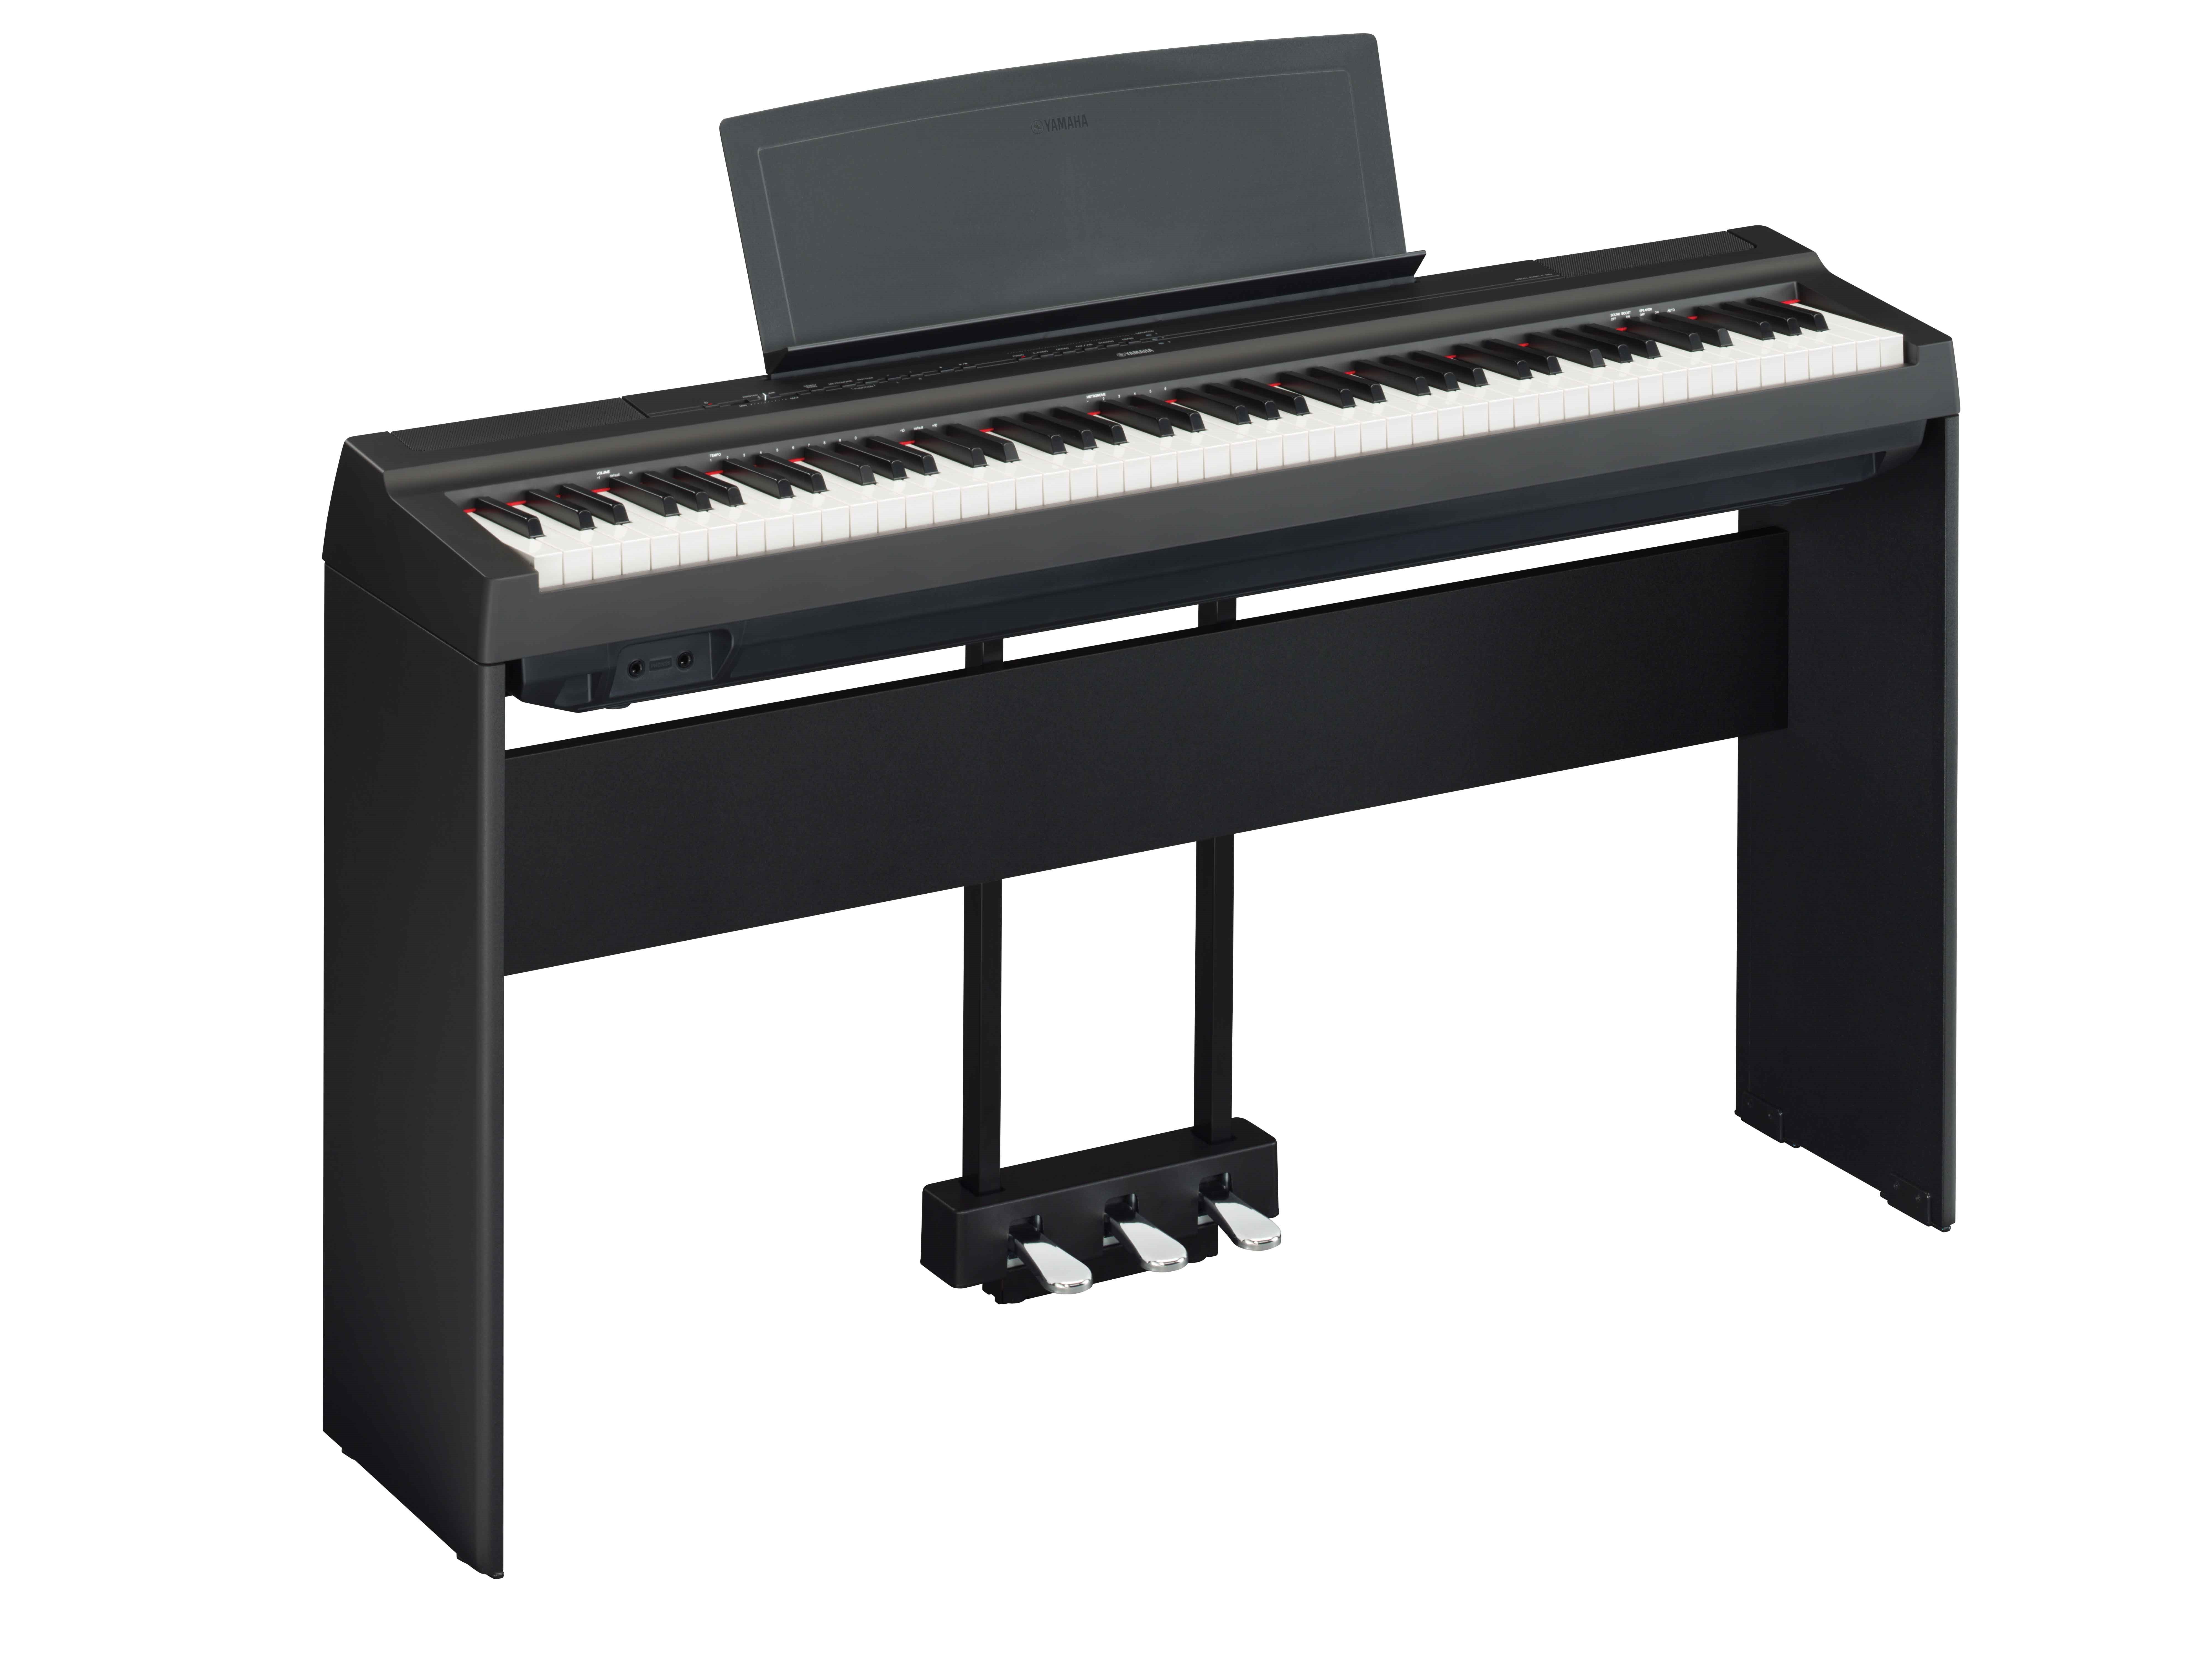 Black digital piano on stand with pedals and music stand.